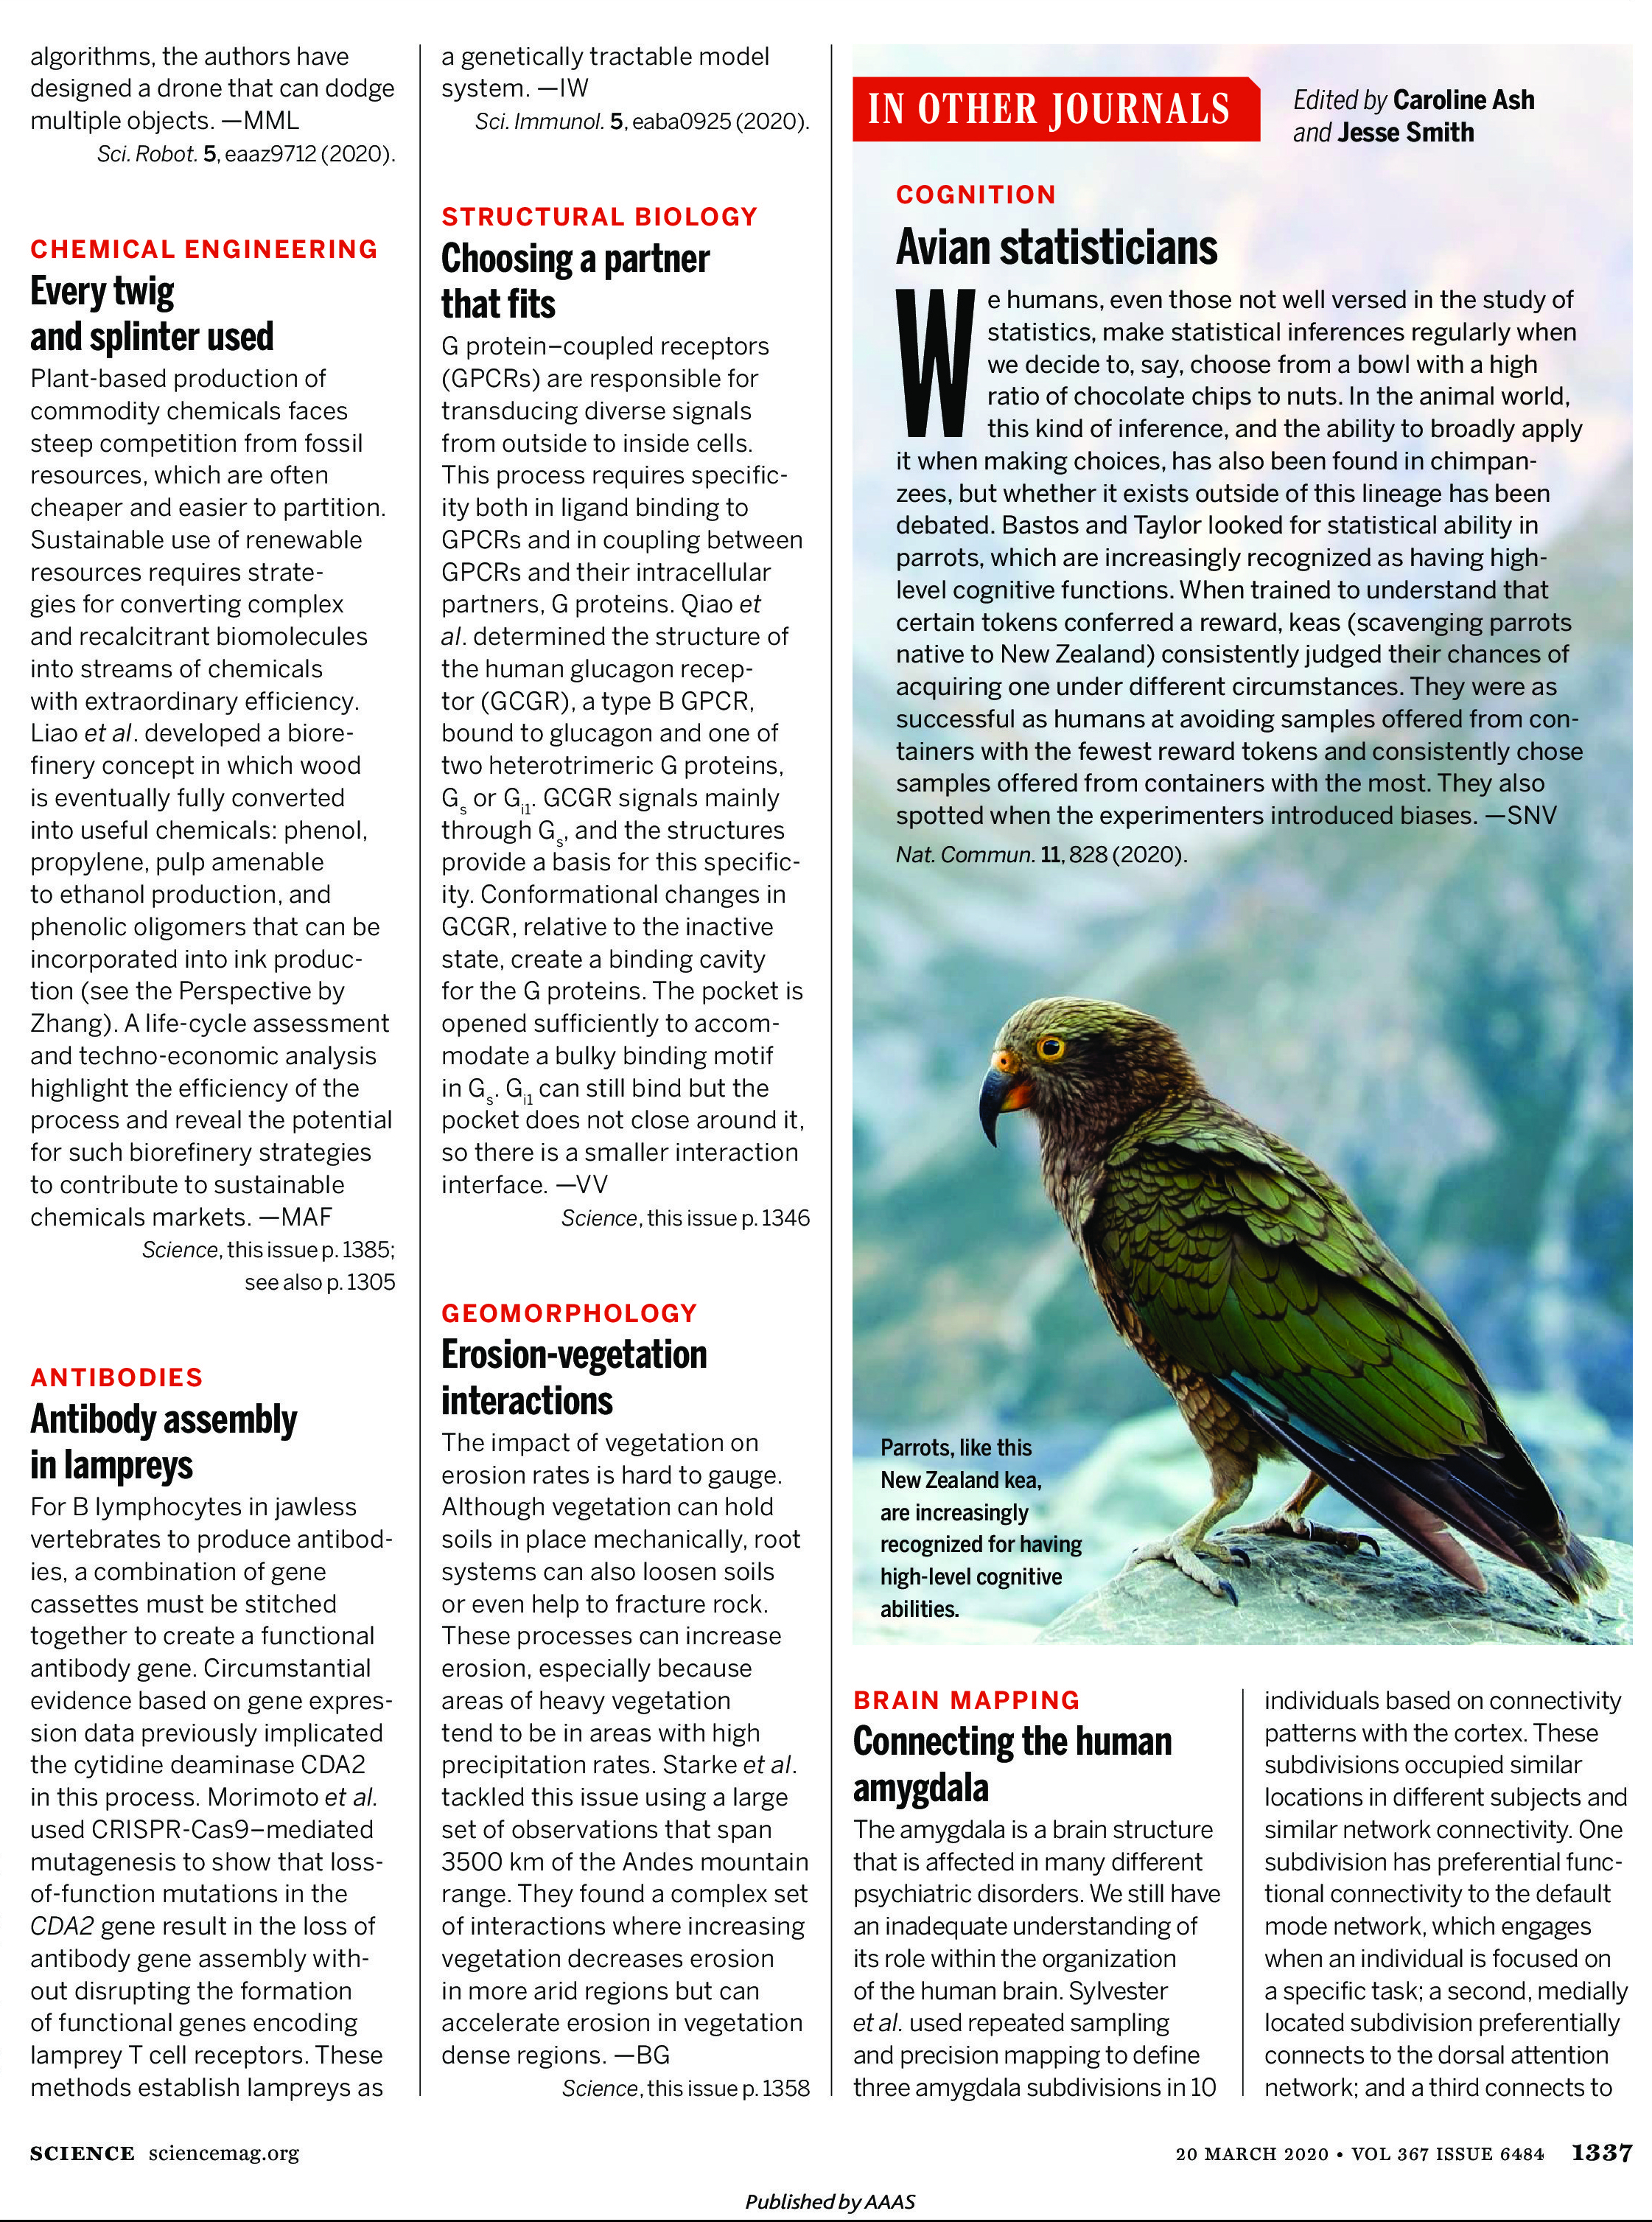 Science Magazine Journal March 20 2020 Research Highlights-page-1